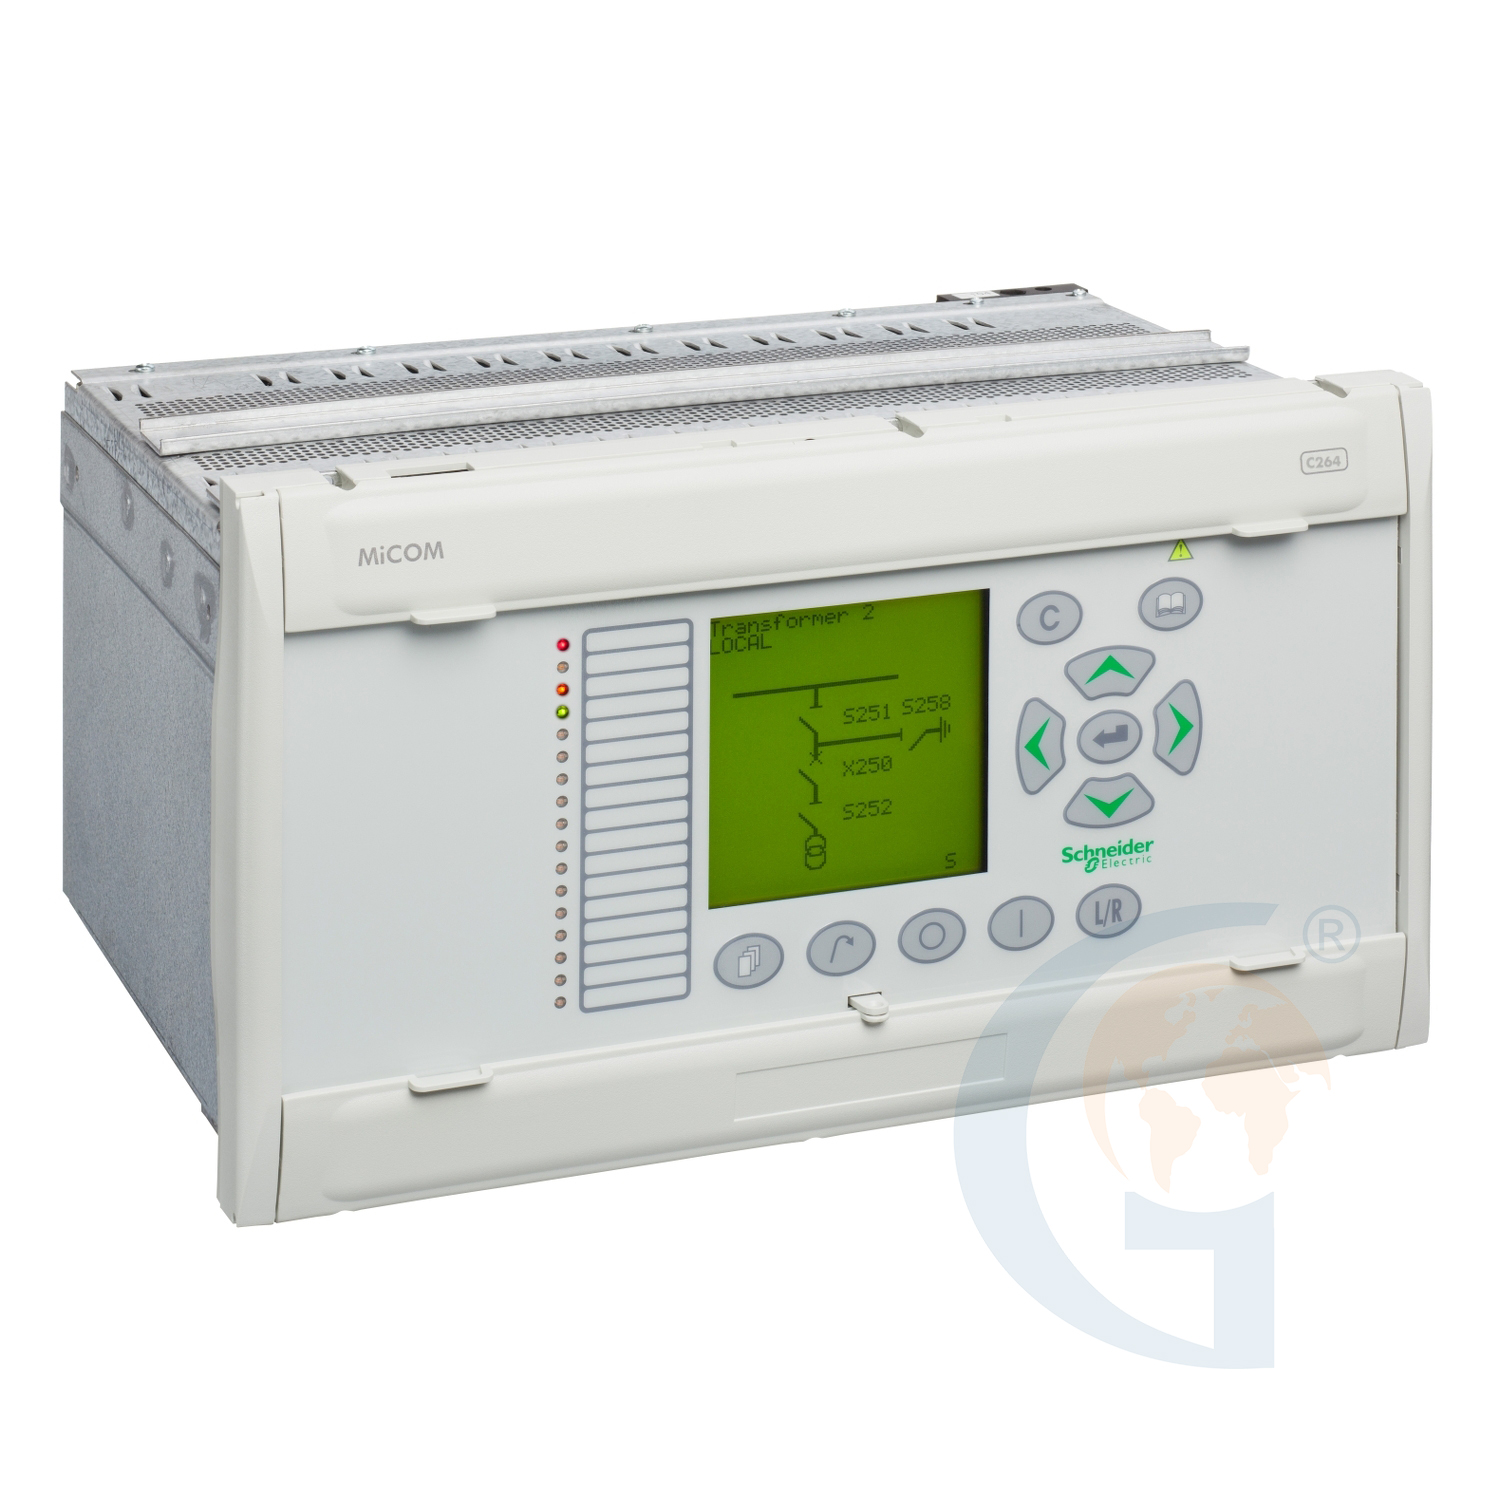 Schneider Electric C264T5-------0---- MICOM C264 60T LEDS – BAY CONTROLLERS AND RTUS https://gesrepair.com/wp-content/uploads/2020/Schneider/Schneider_Electric_C264T5-------0----_.jpg